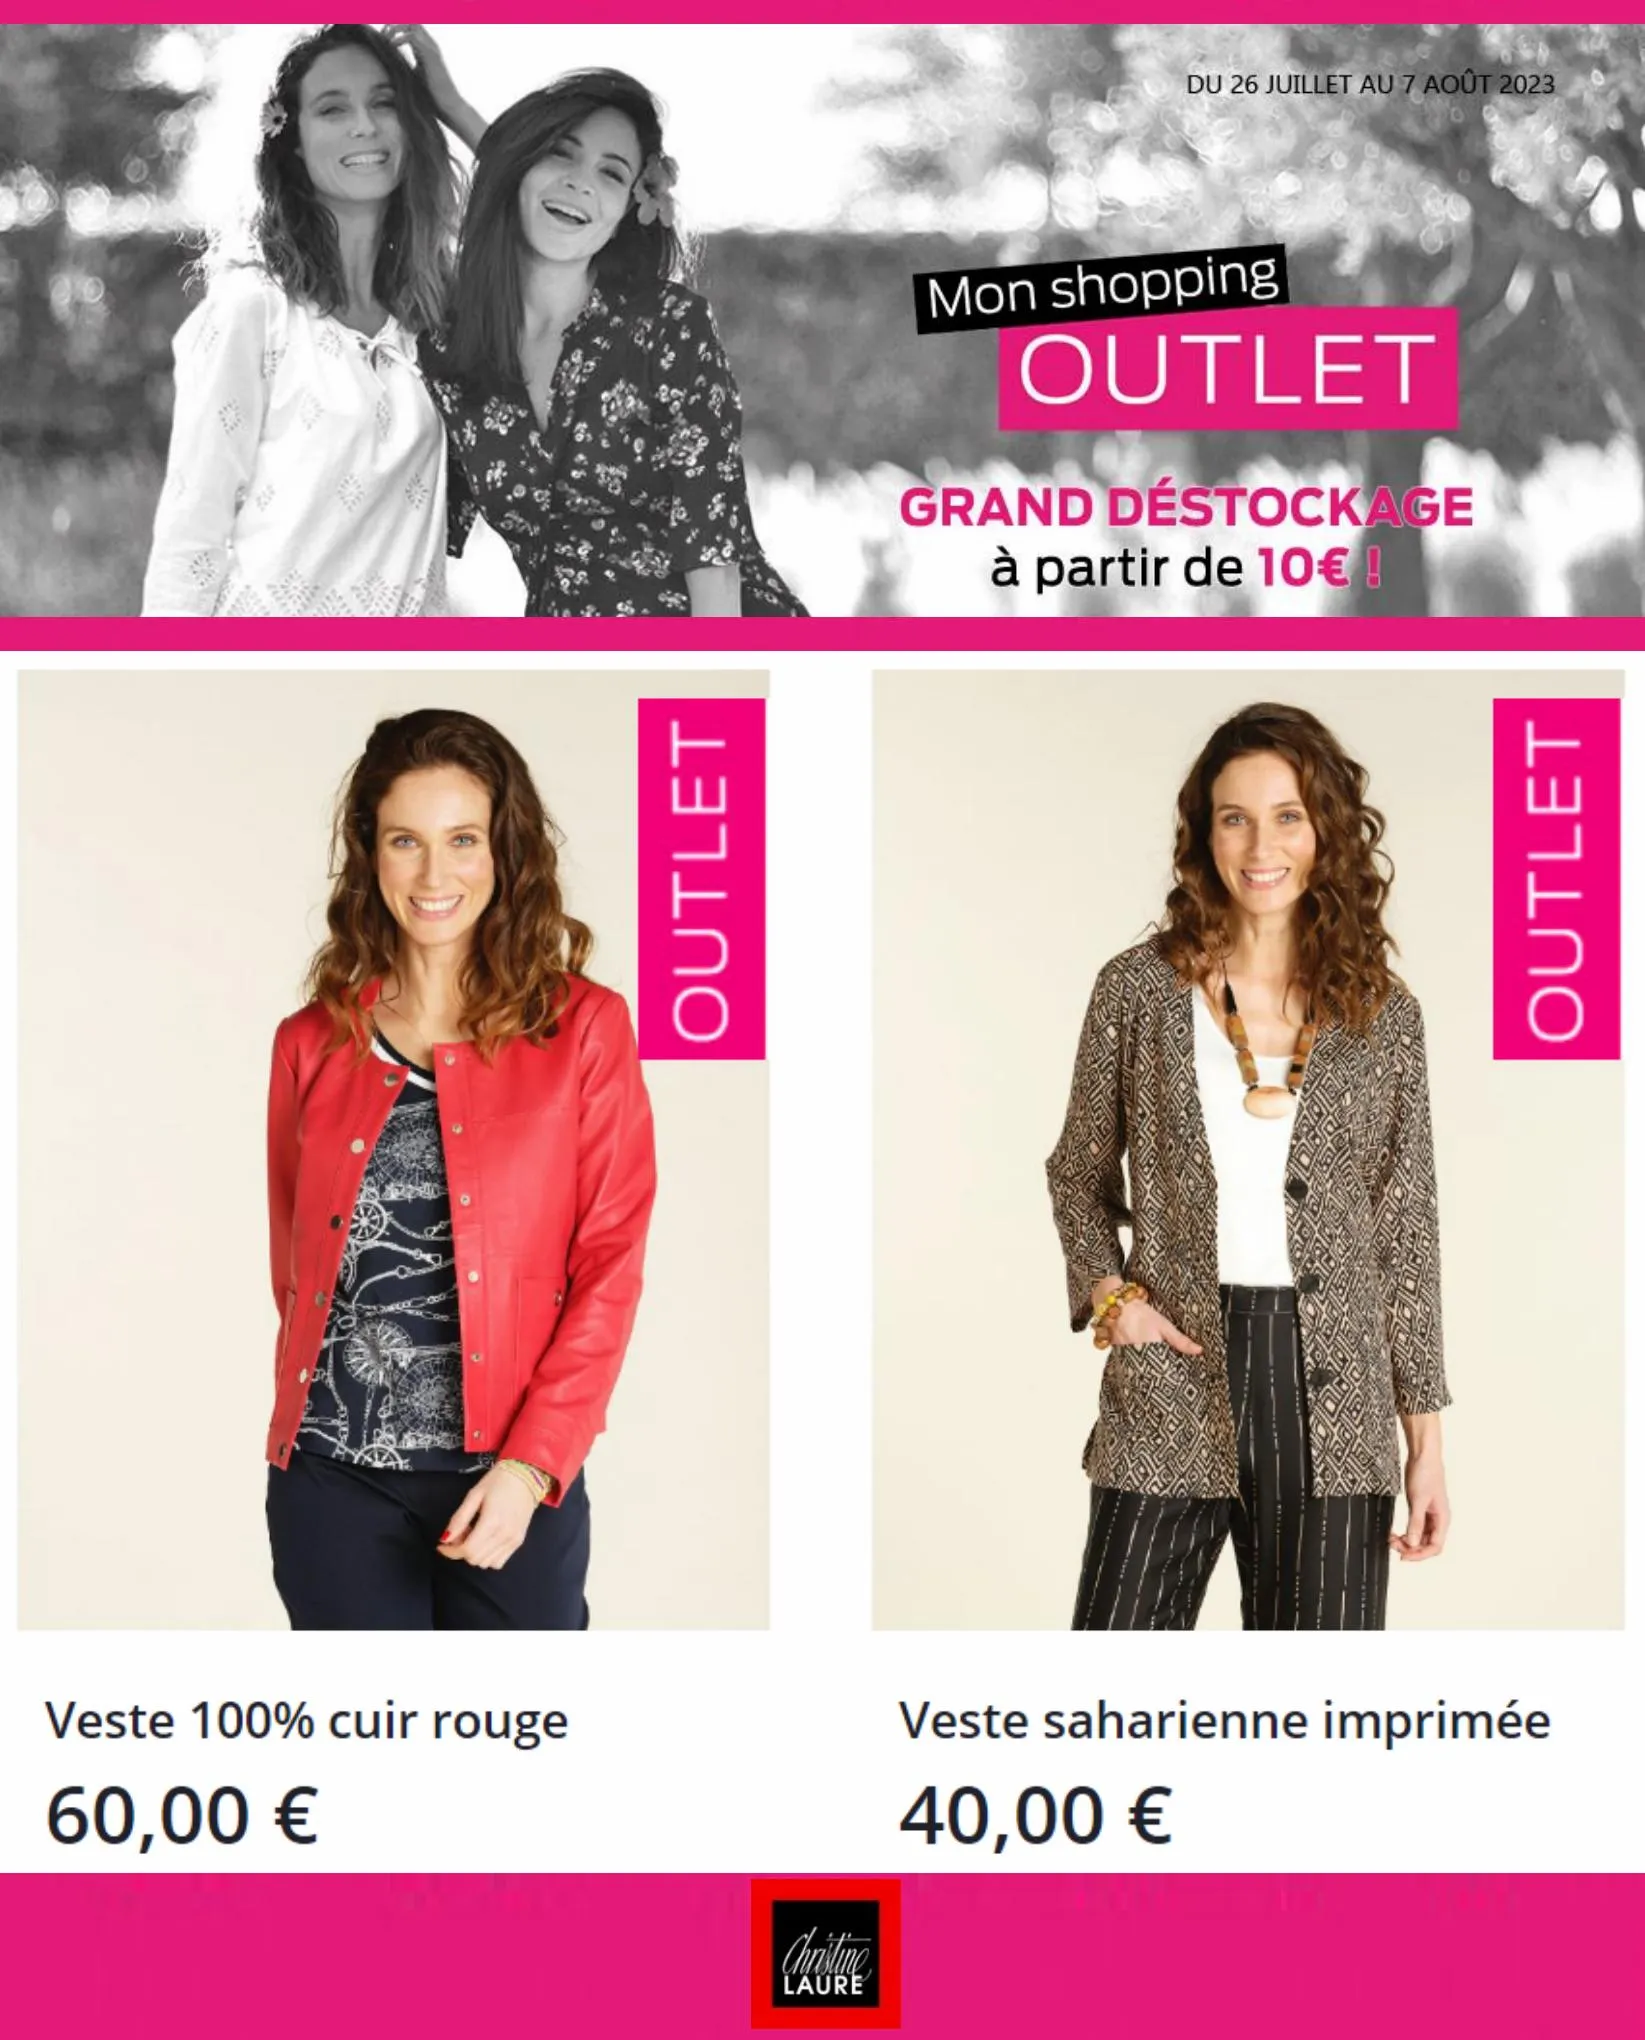 Catalogue Mon Shopping Outlet, page 00003